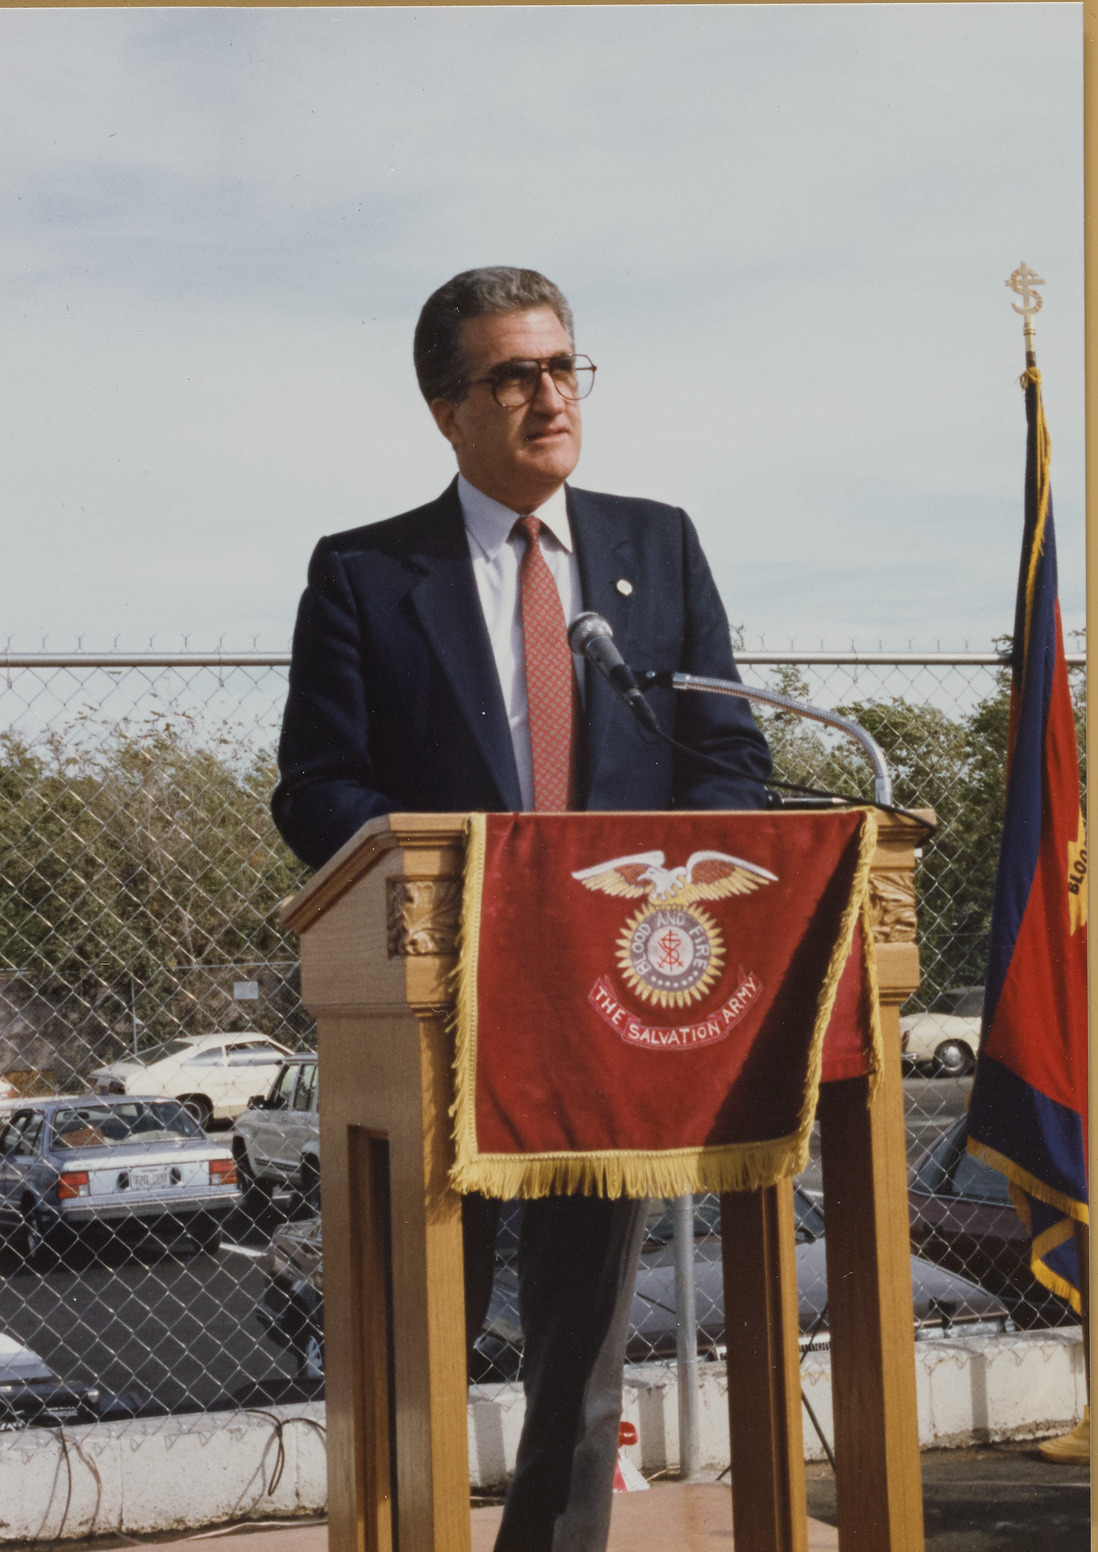 Photograph of Ron Lurie at dedication event for Emergency Lodge/Family Service Facility for the Salvation Army